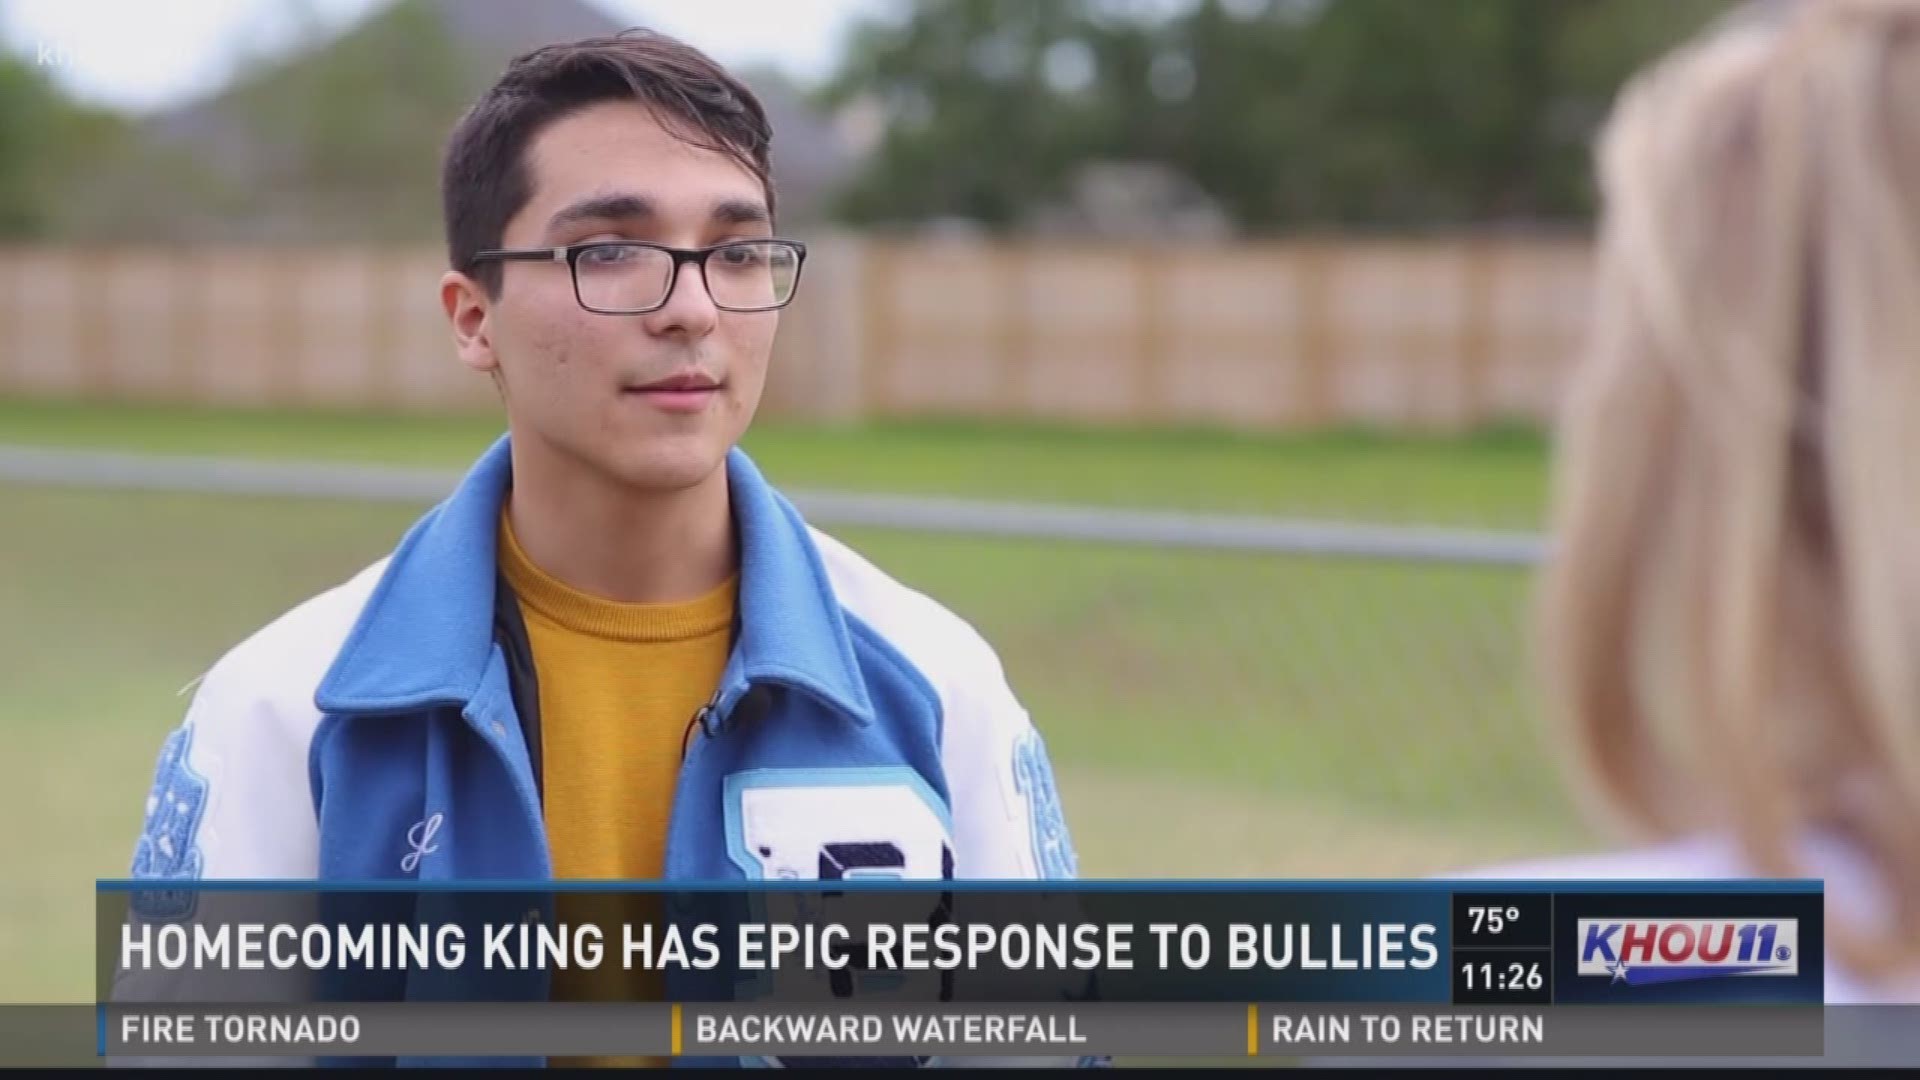 When bullies targeted a newly crowned homecoming king at a local high school, the senior took a stand against them. 